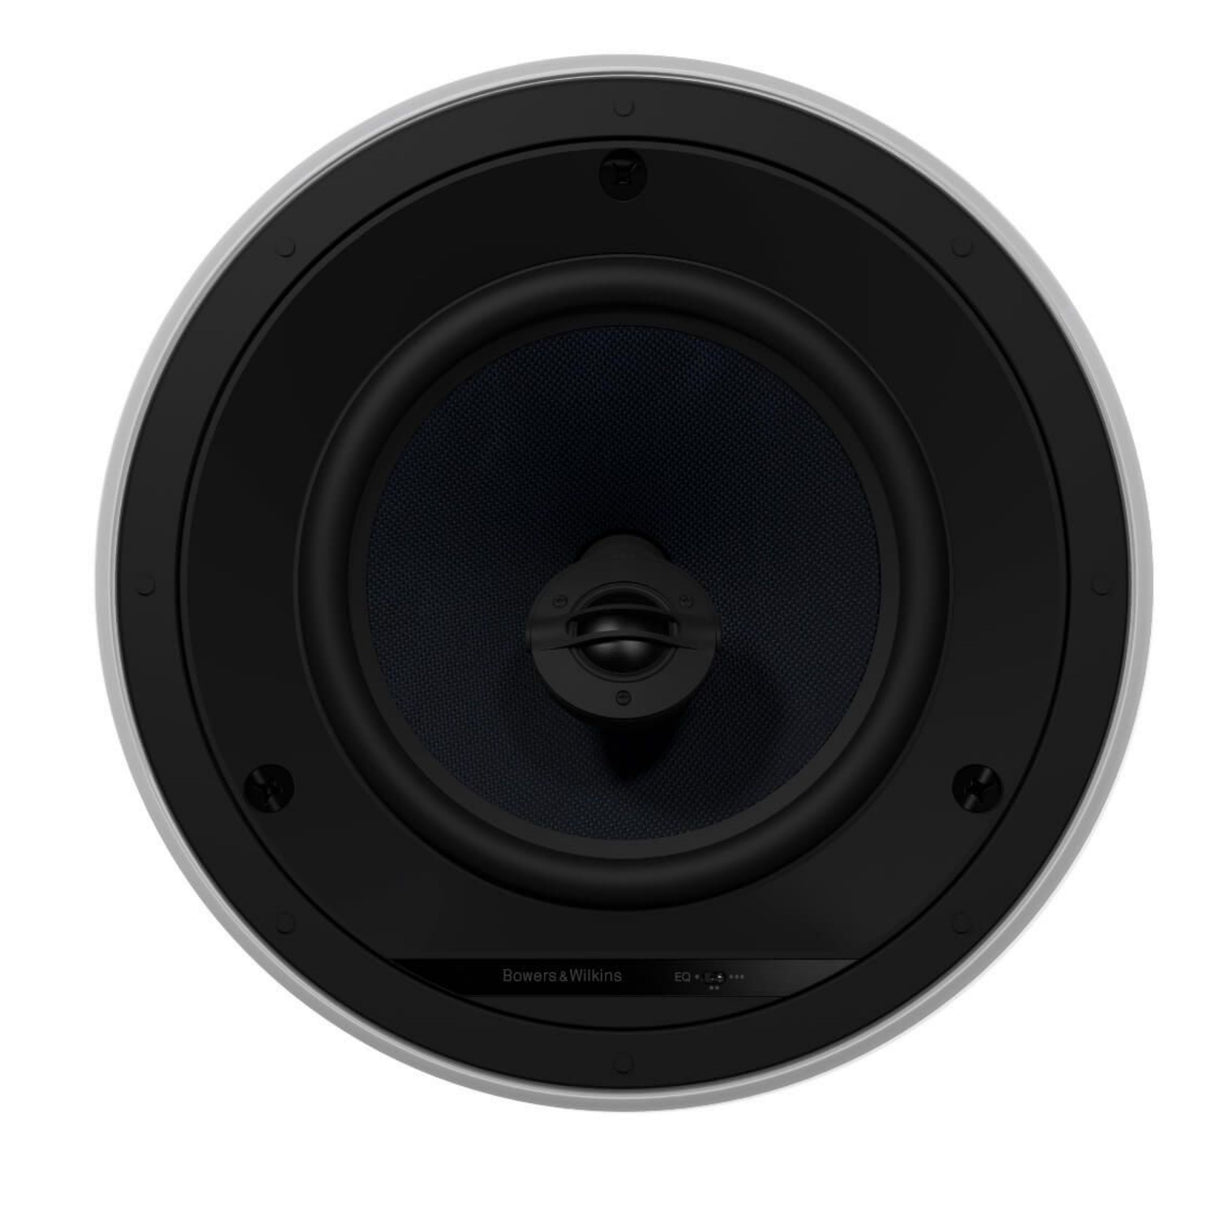 Bowers & Wilkins CCM682- 8 Inches, 2-Way In-Ceiling Speaker (Each)